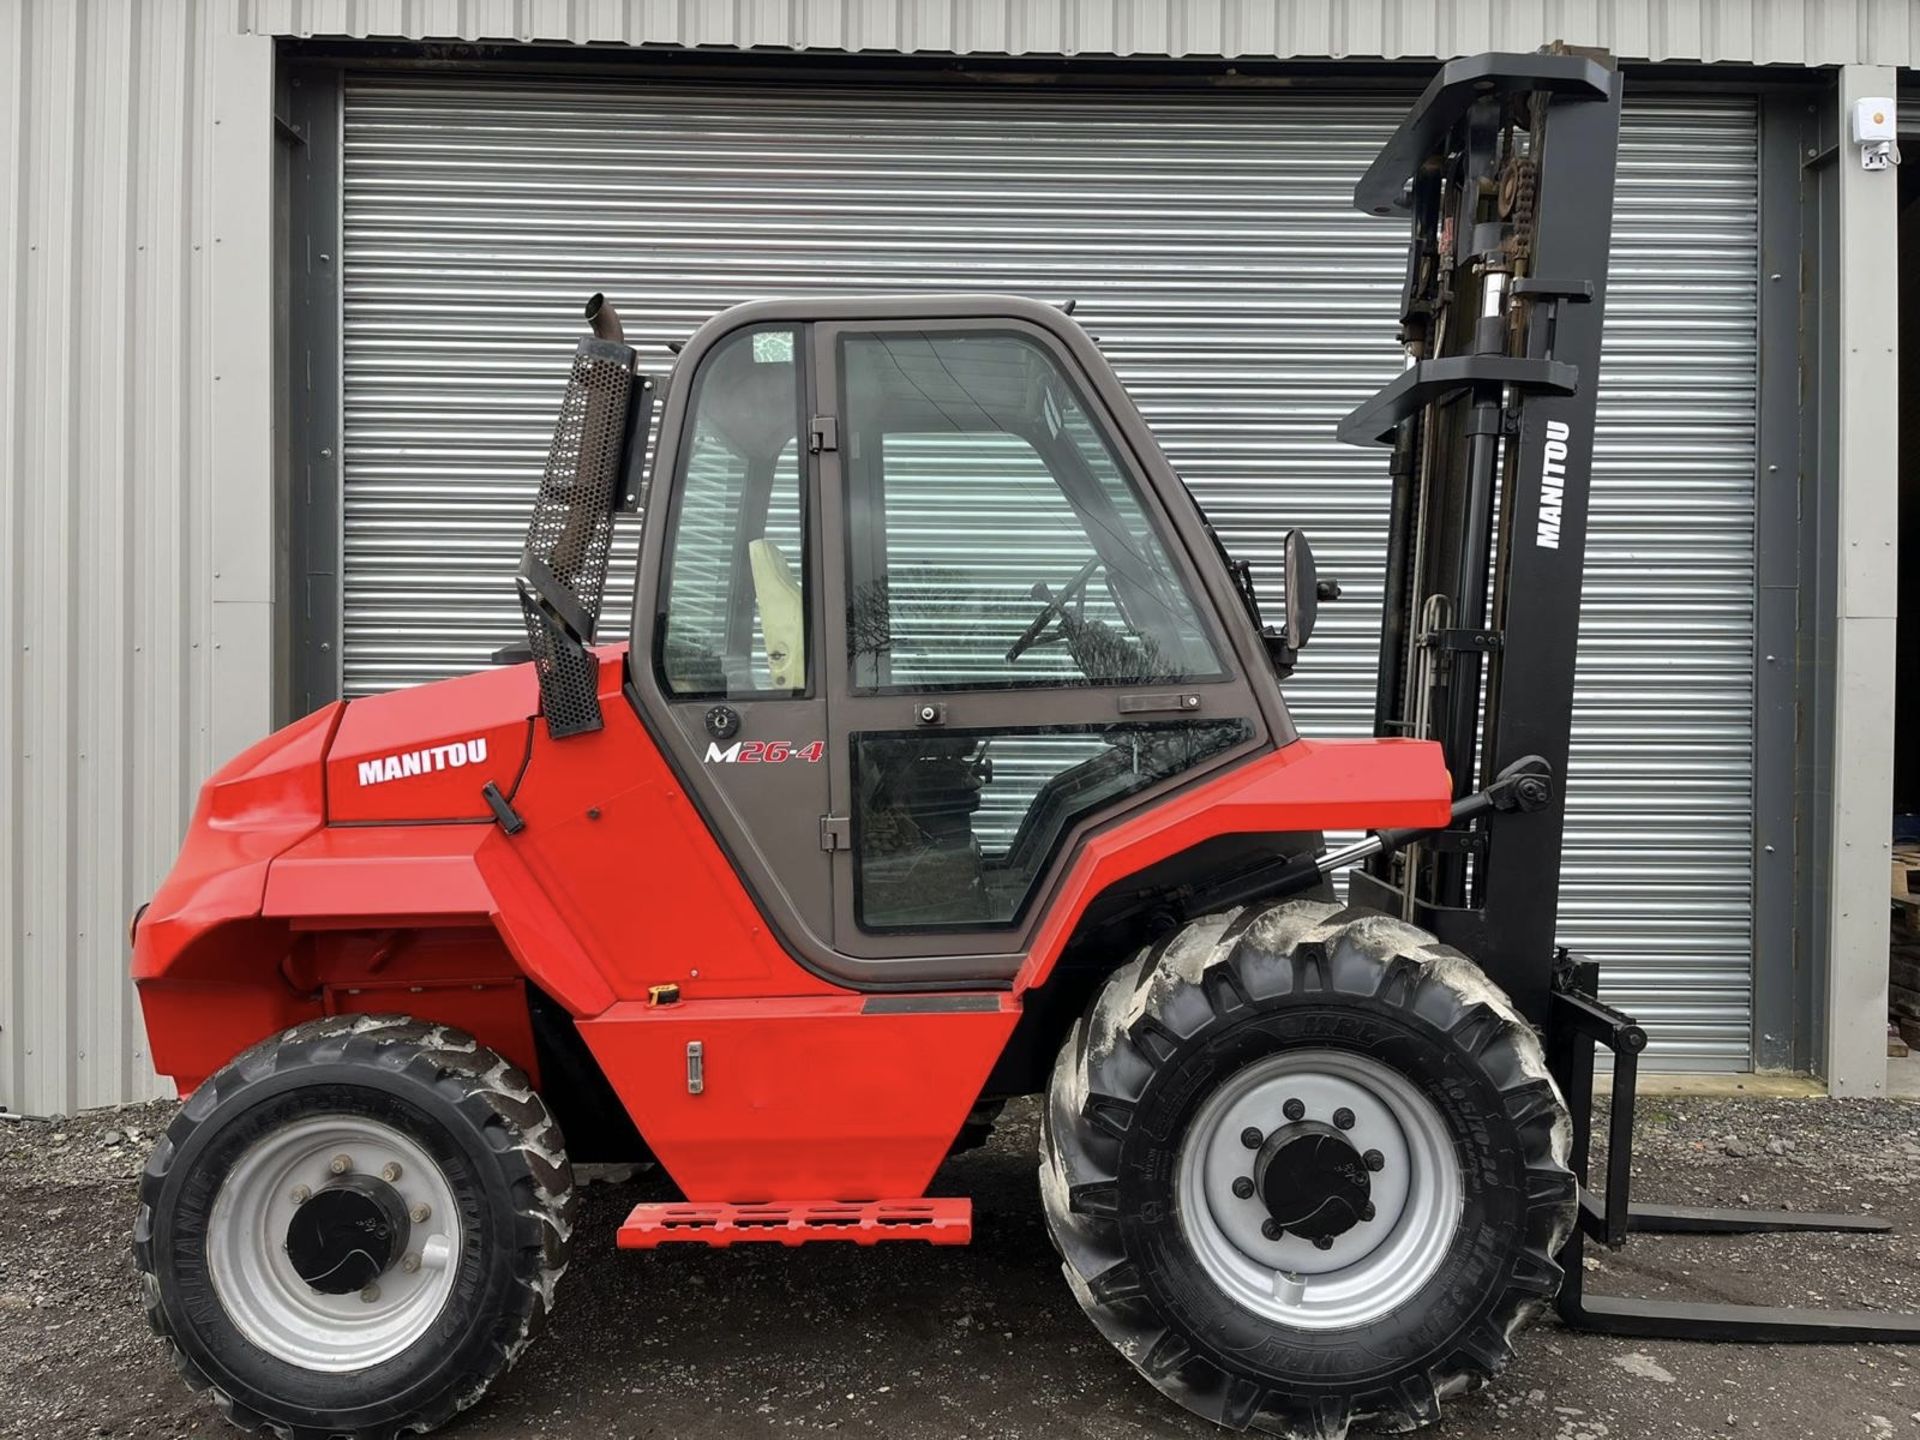 2017, MANITOU - M26, 2.6 Tonne (4WD) Forklift Truck - Image 4 of 6